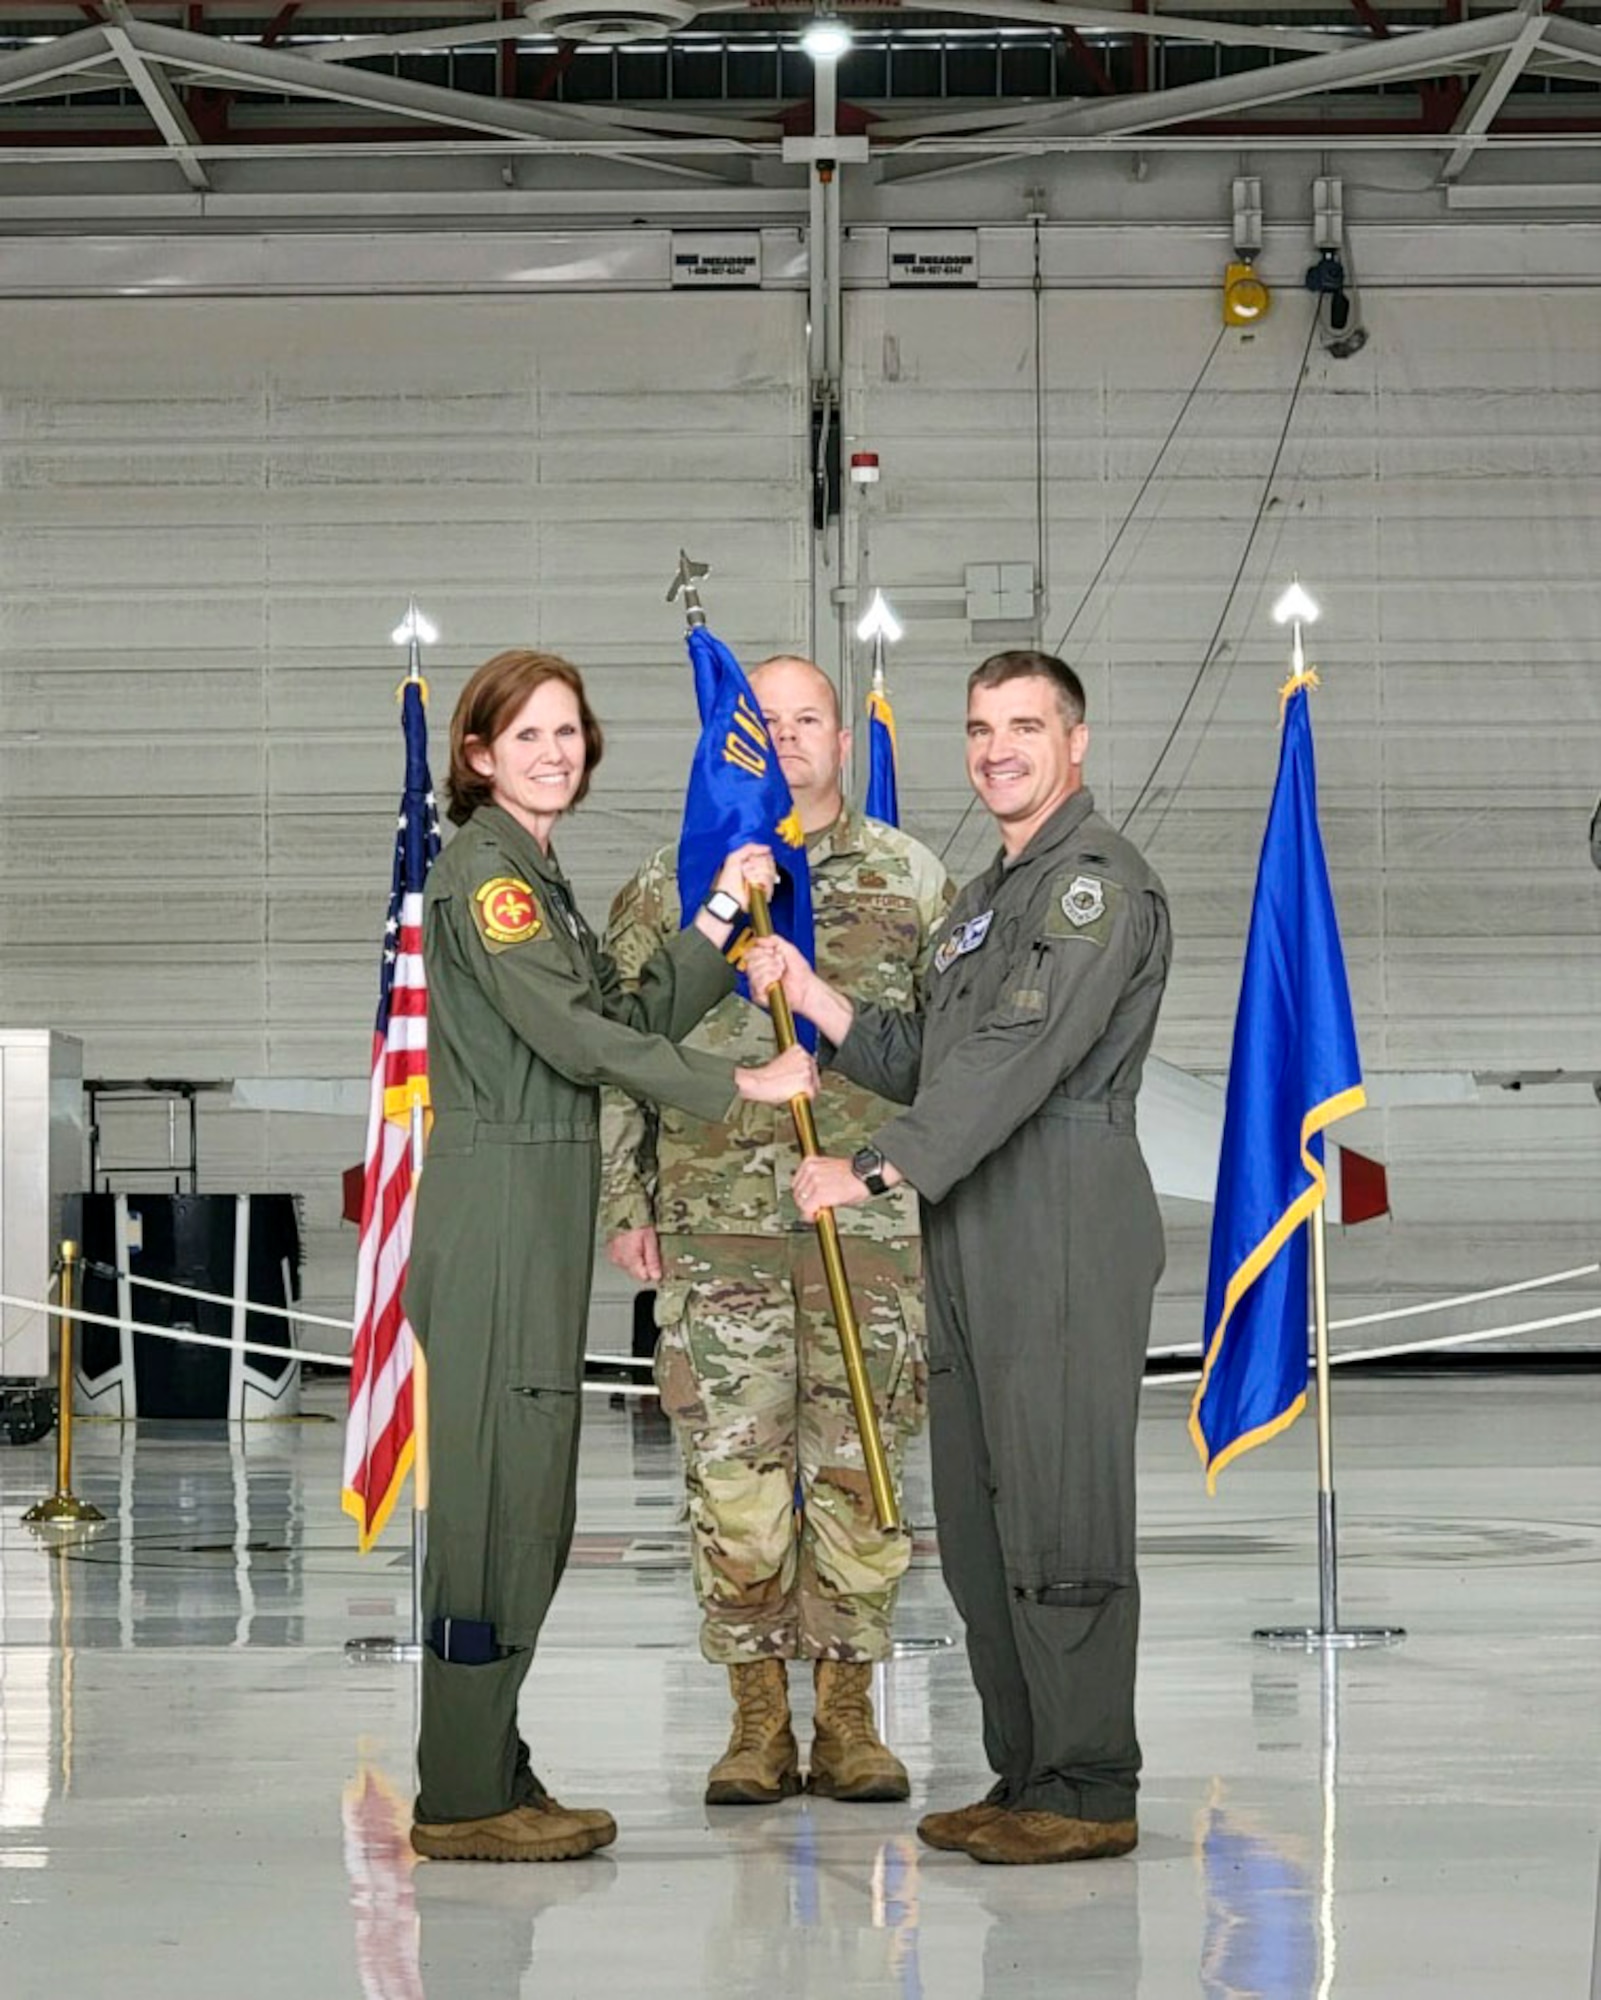 Two military members wearing flight suits look towards the camera as they hold a flag.